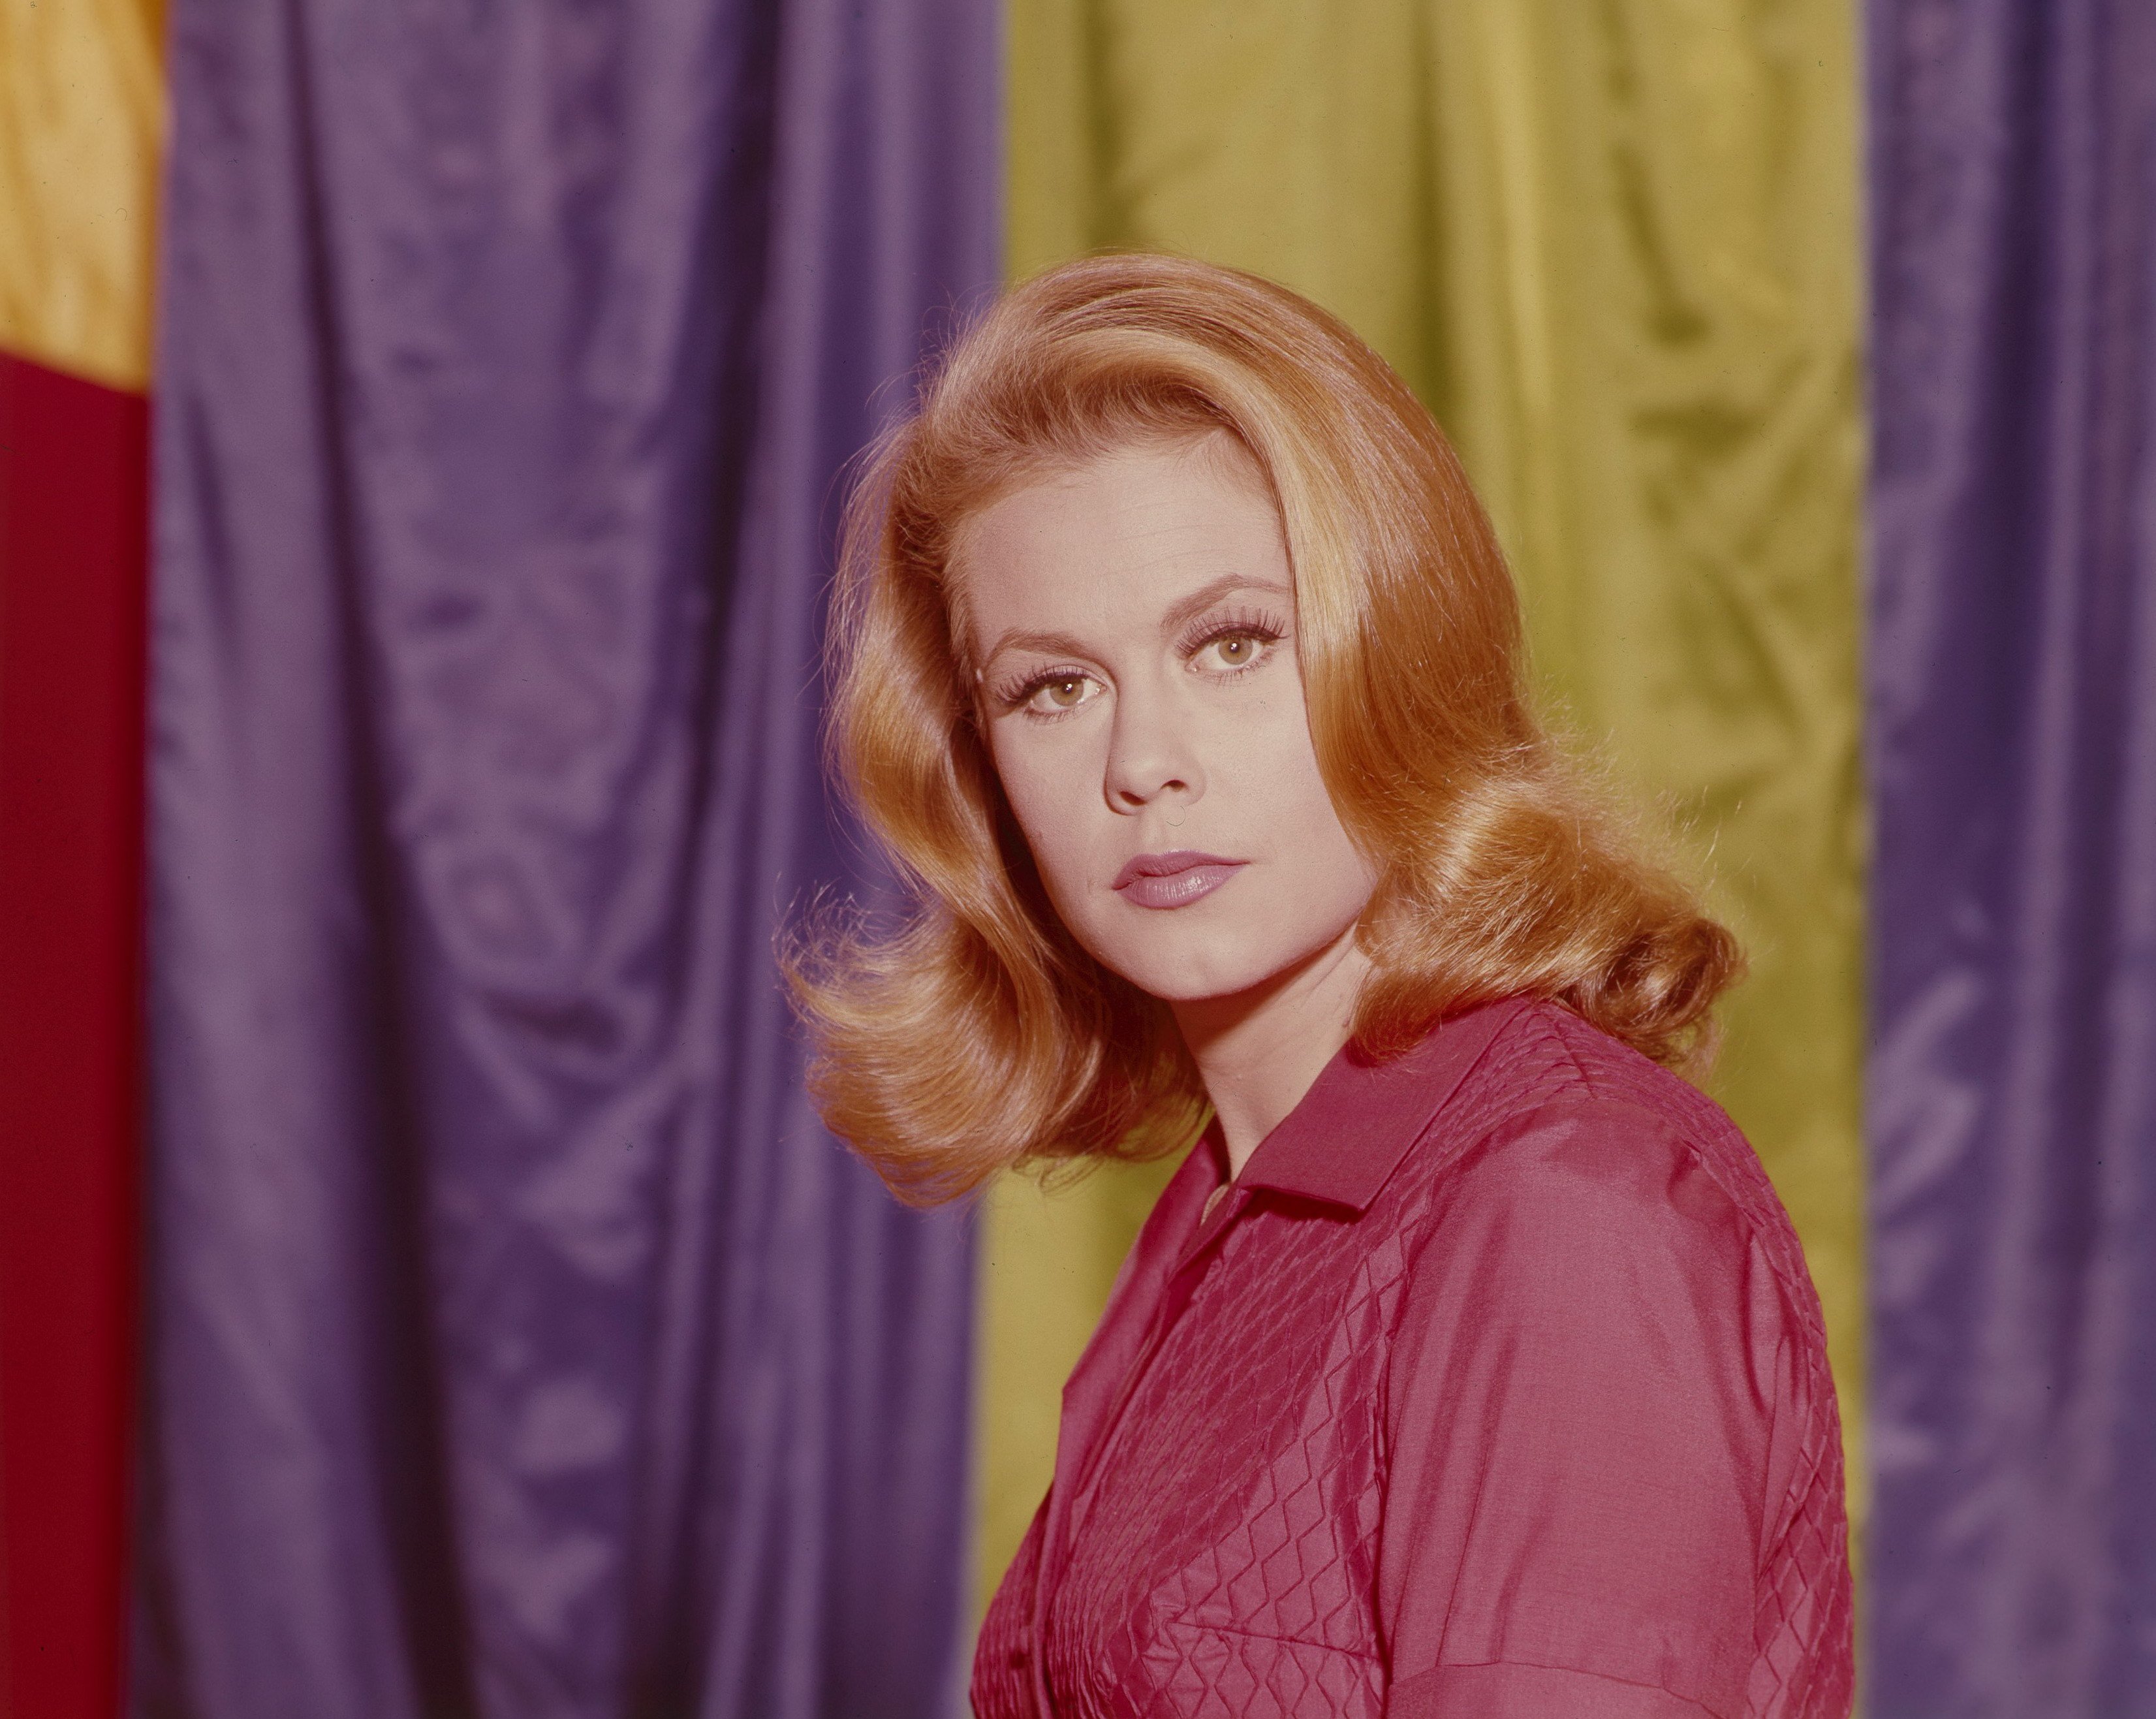 Pictured: A portrait of "Bewitched" star Elizabeth Montgomery on March 1, 1965 | Photo: Getty Images